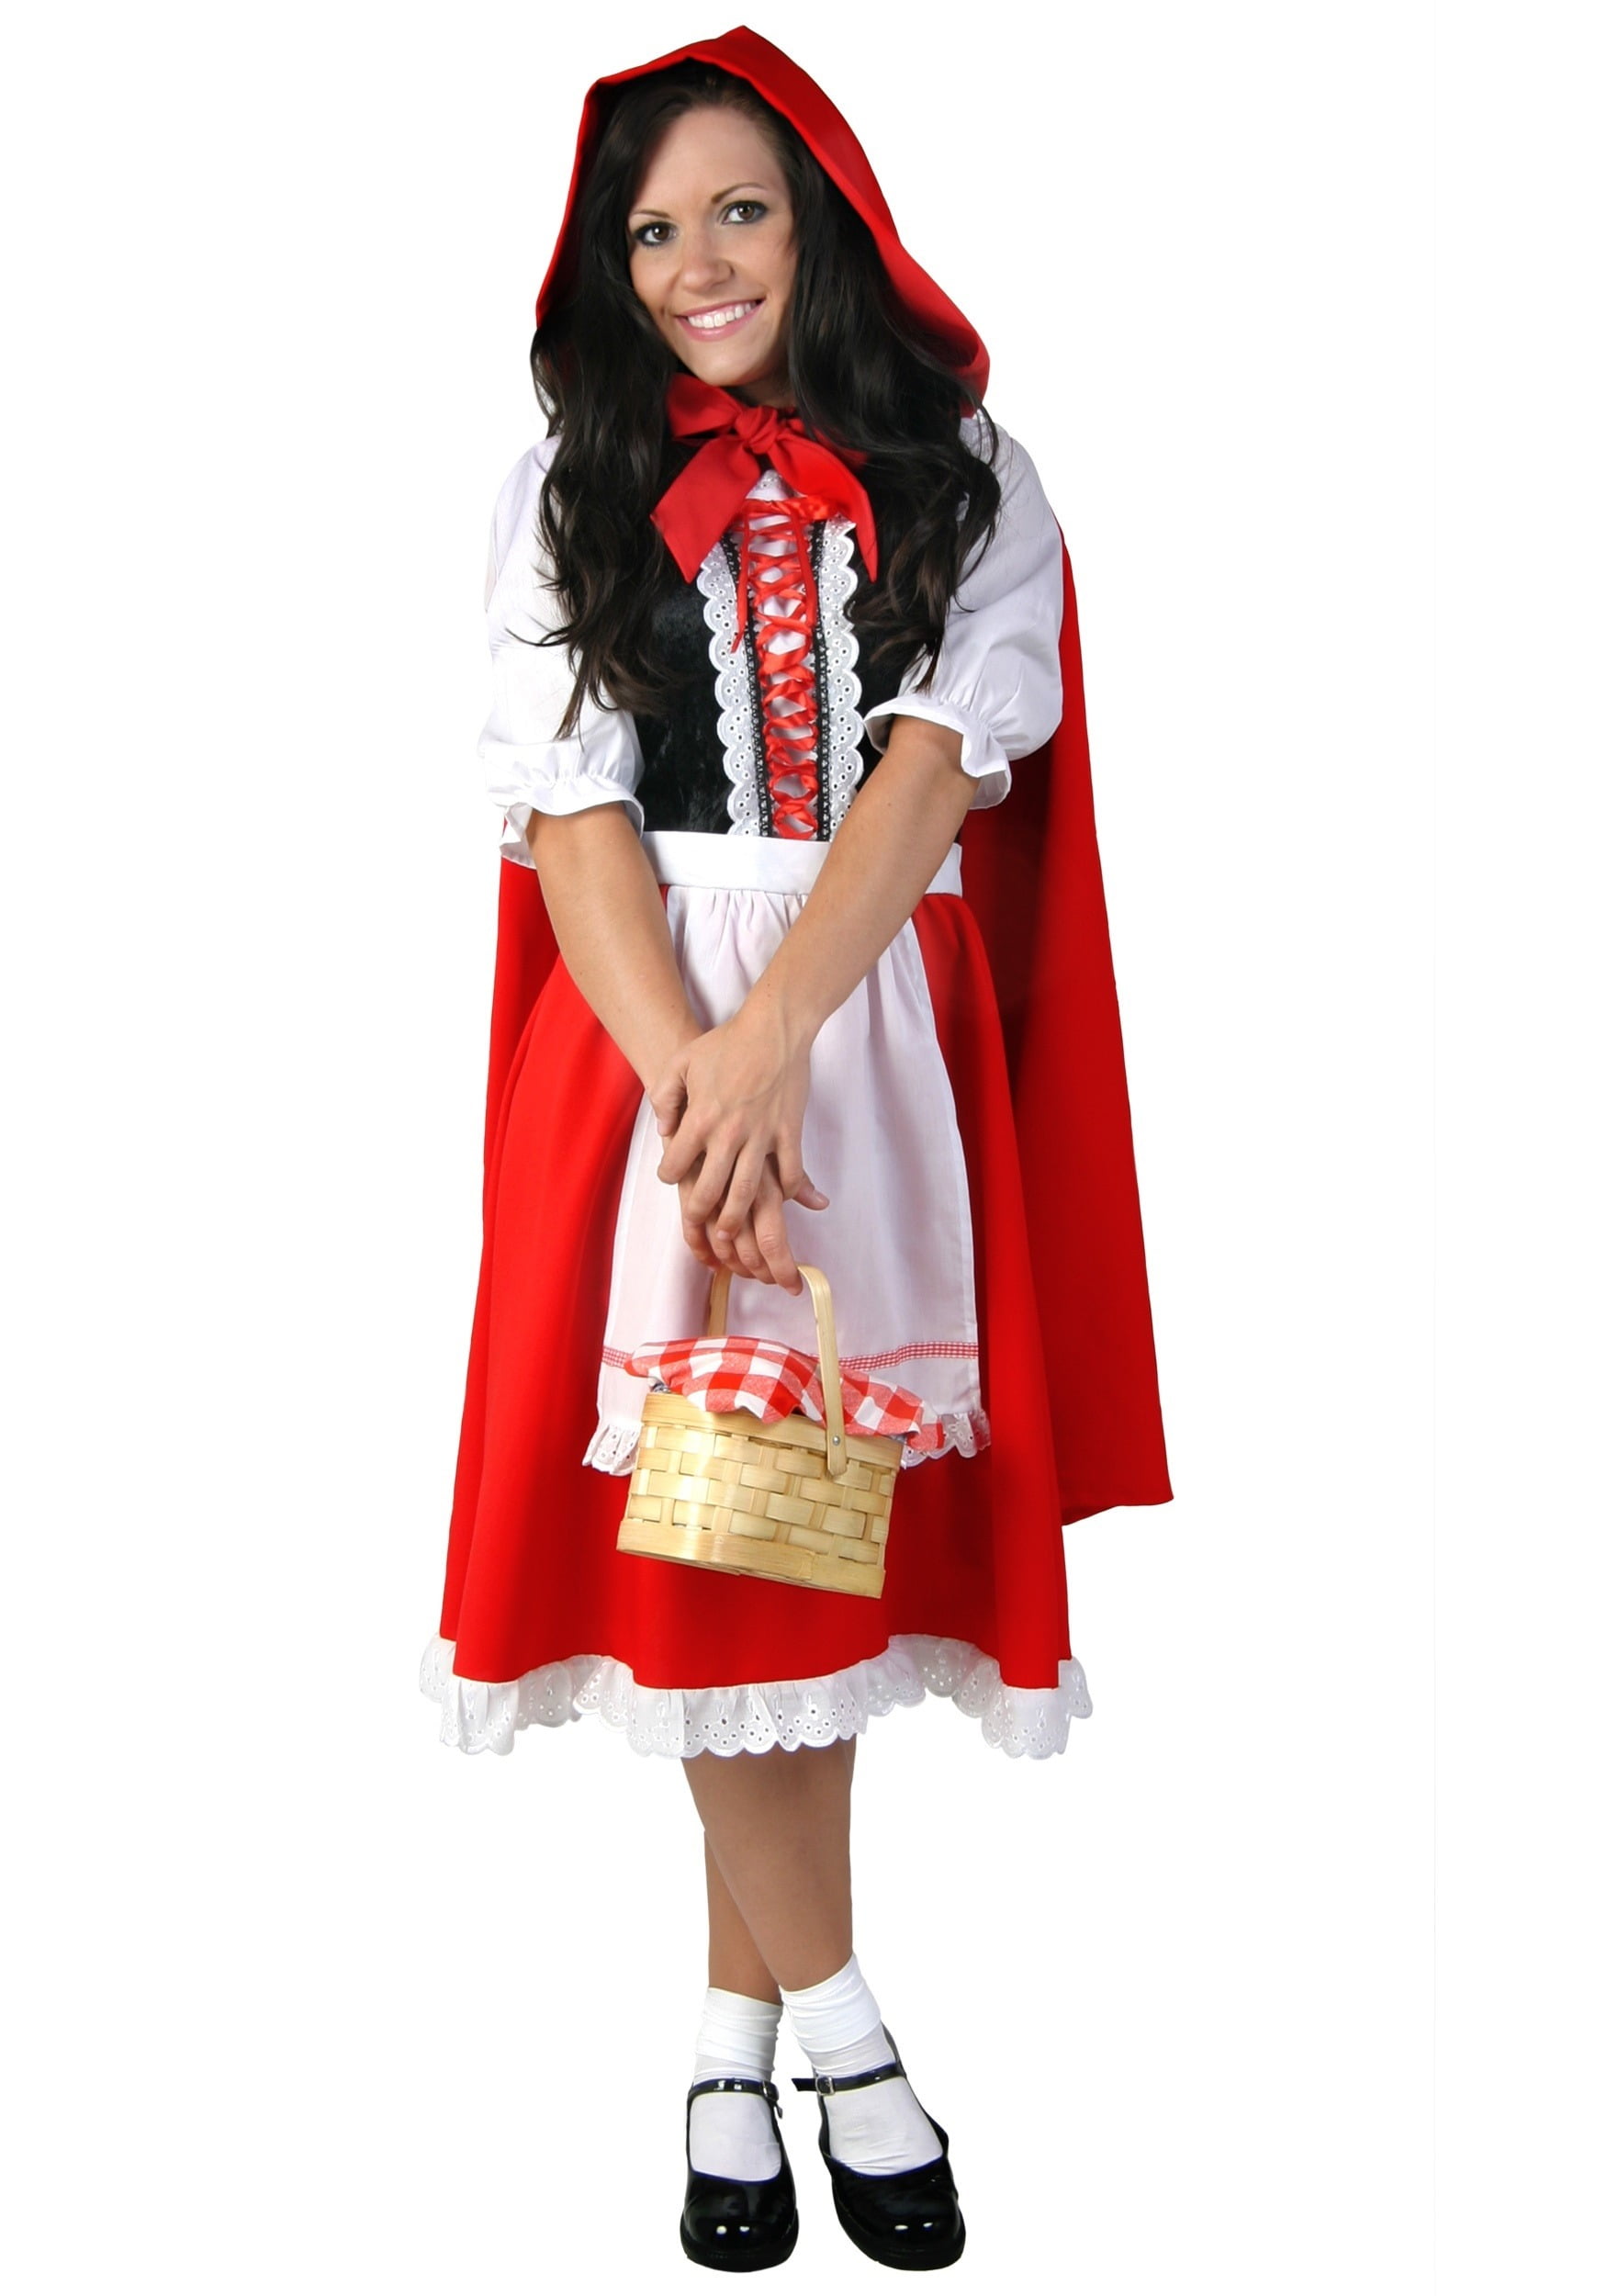 Red　Adult　Little　Costume　Riding　Hood